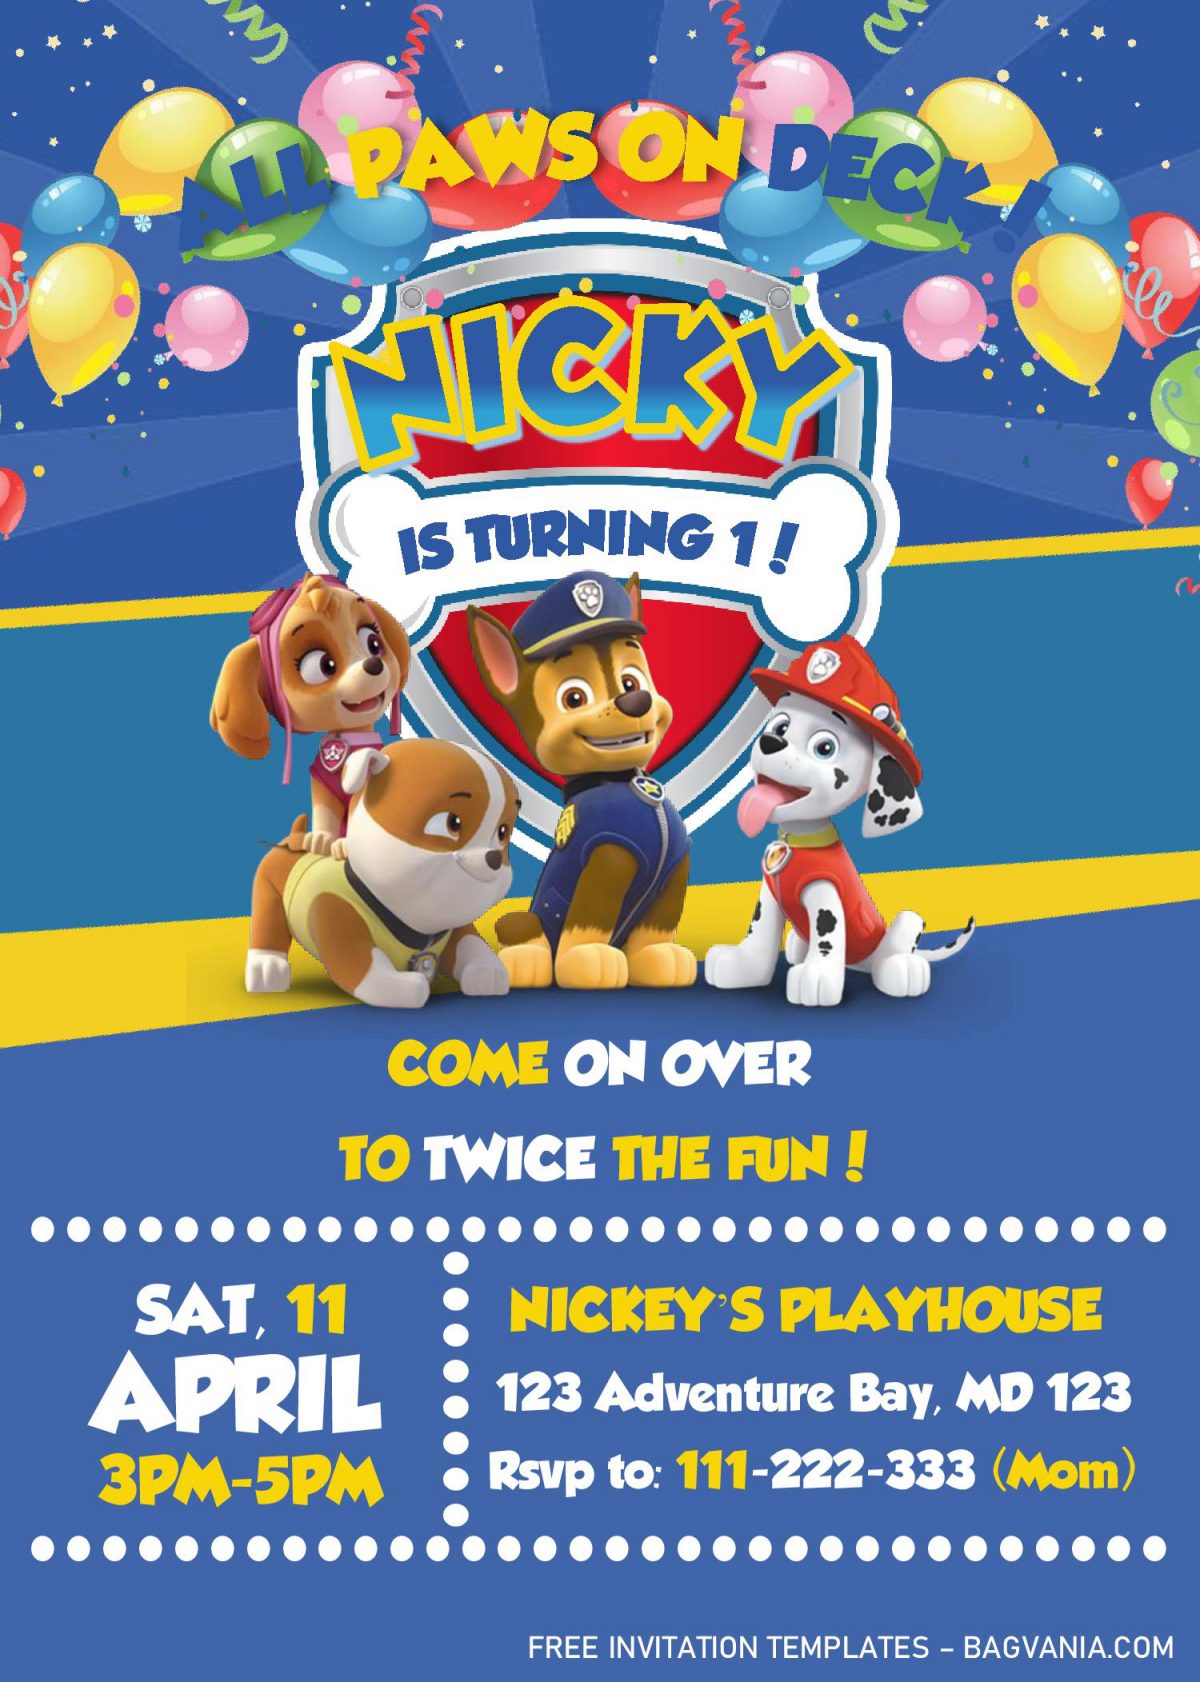 Paw Patrol Invitation Templates - Editable With MS Word and has Paw Patrol's Badge